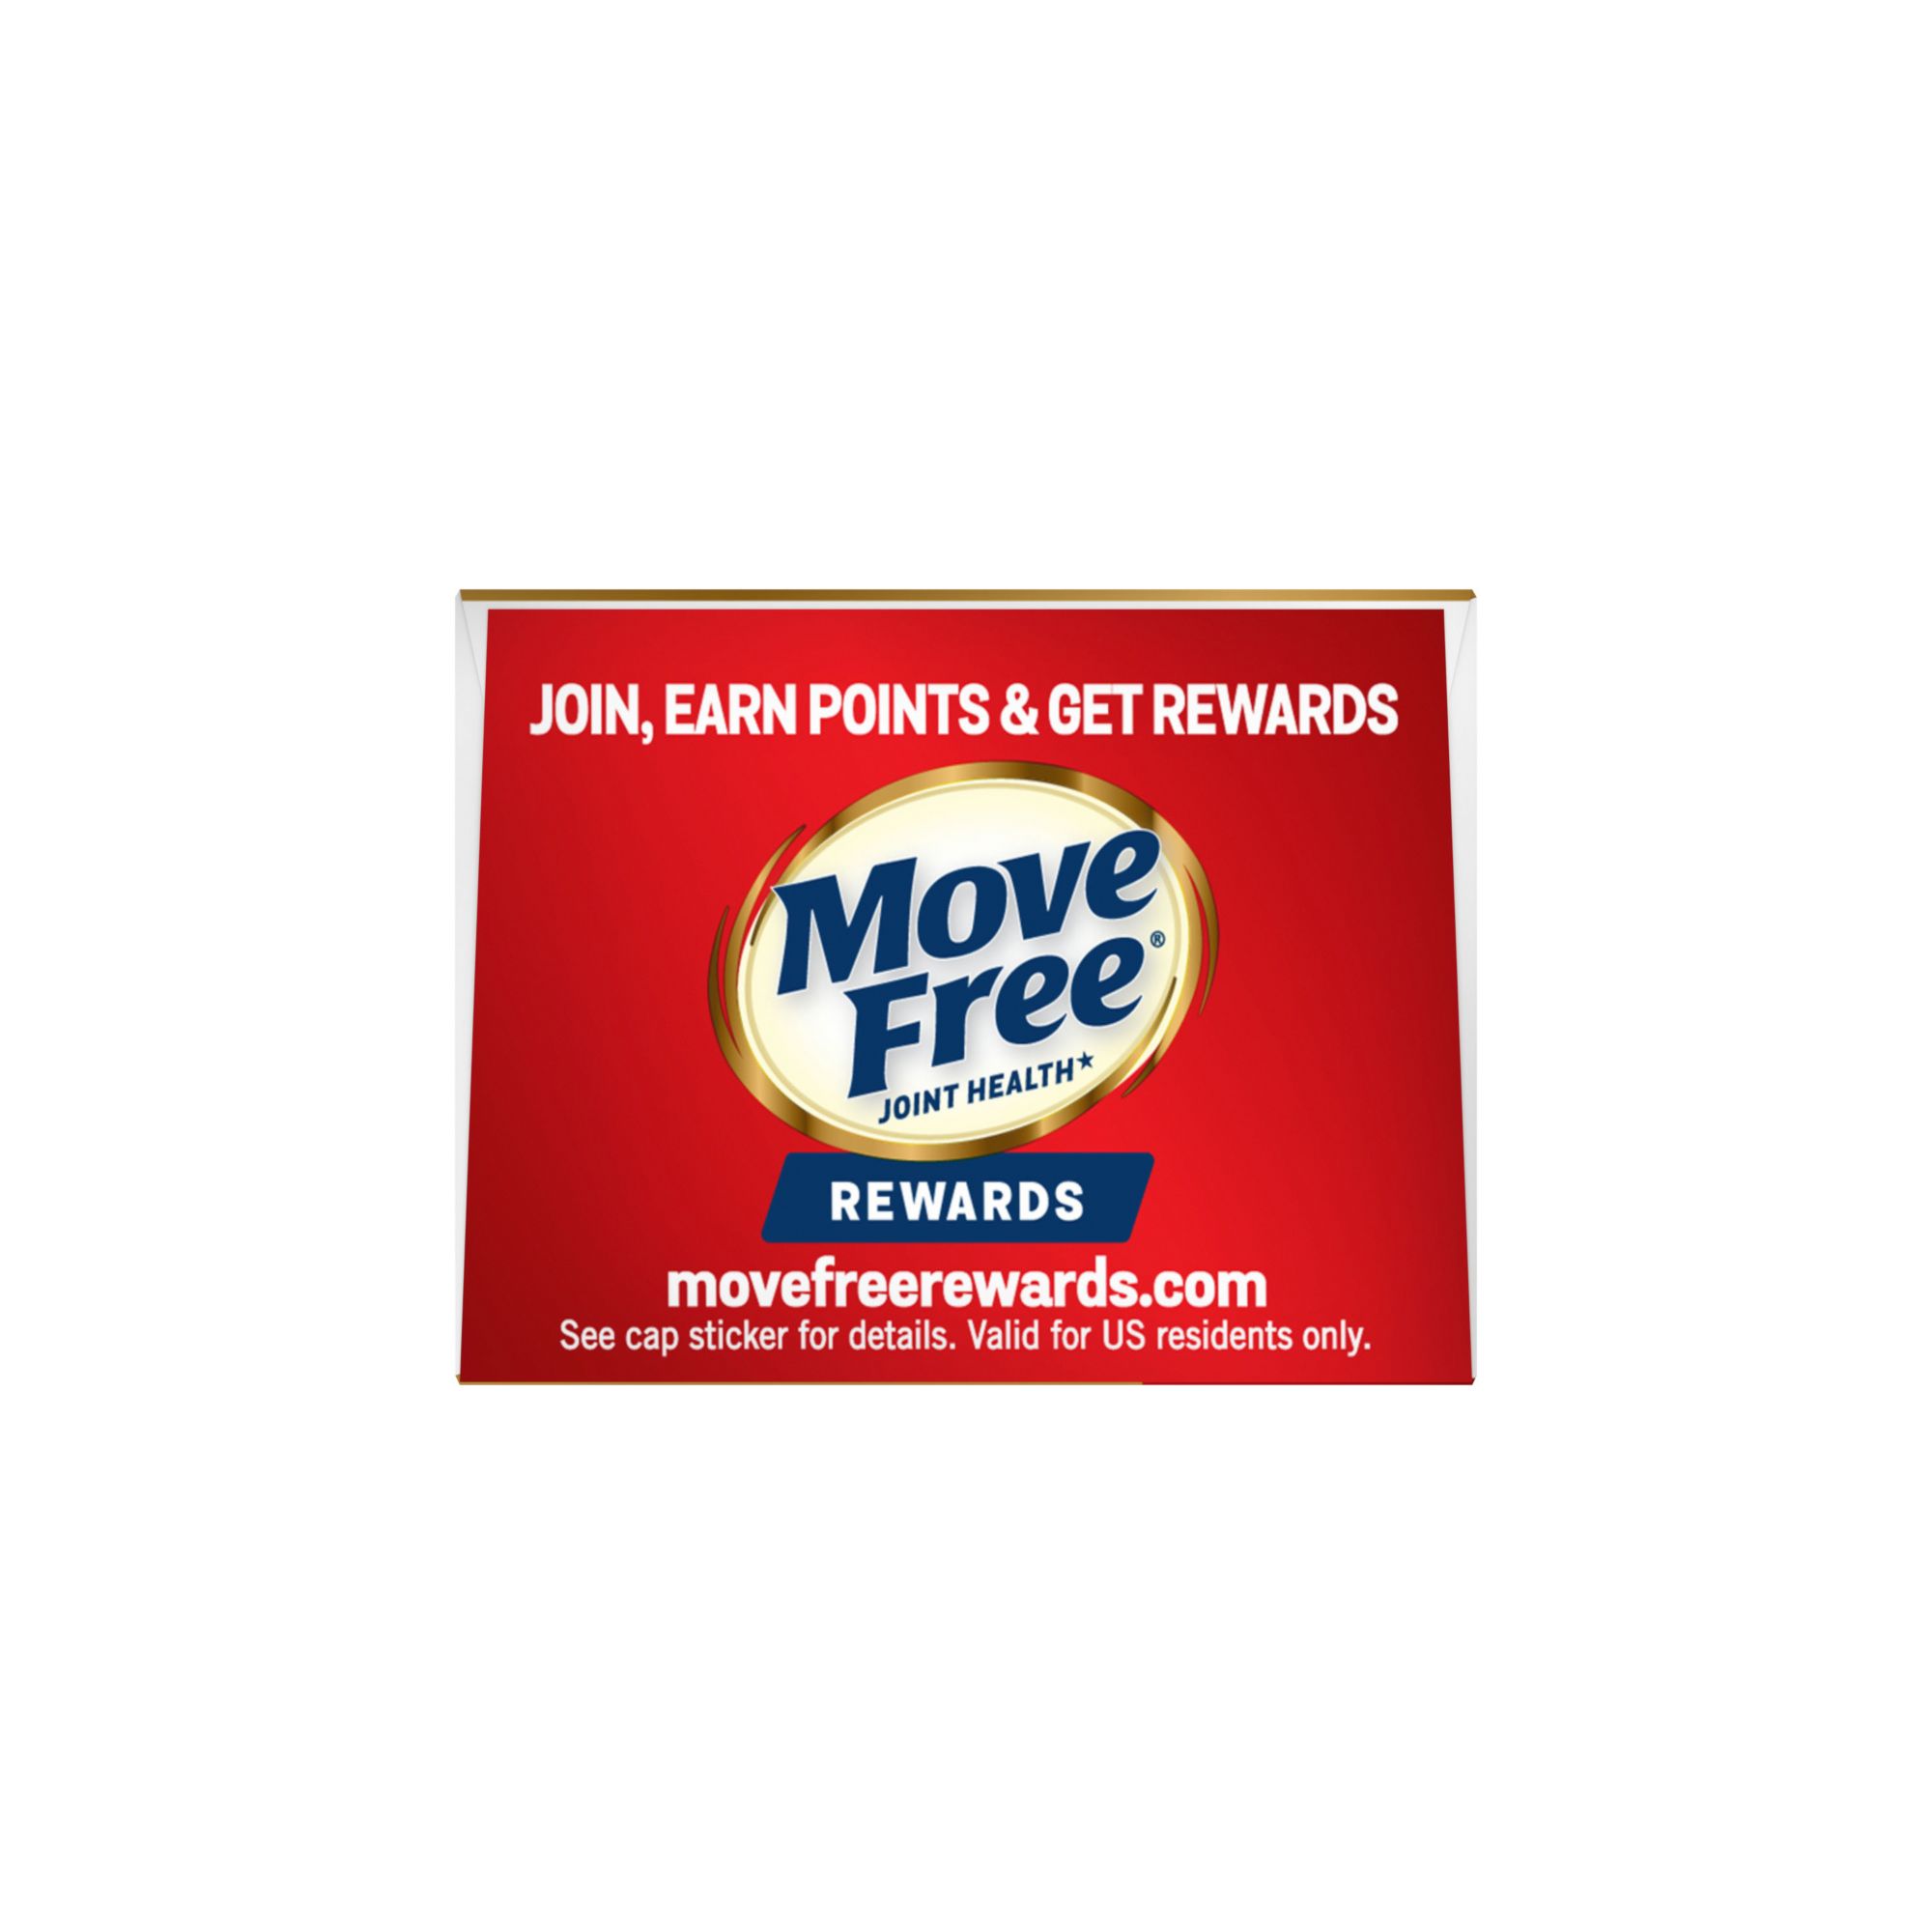 Move Free Ultra Triple Action, Coated Tablets - 75 tablets